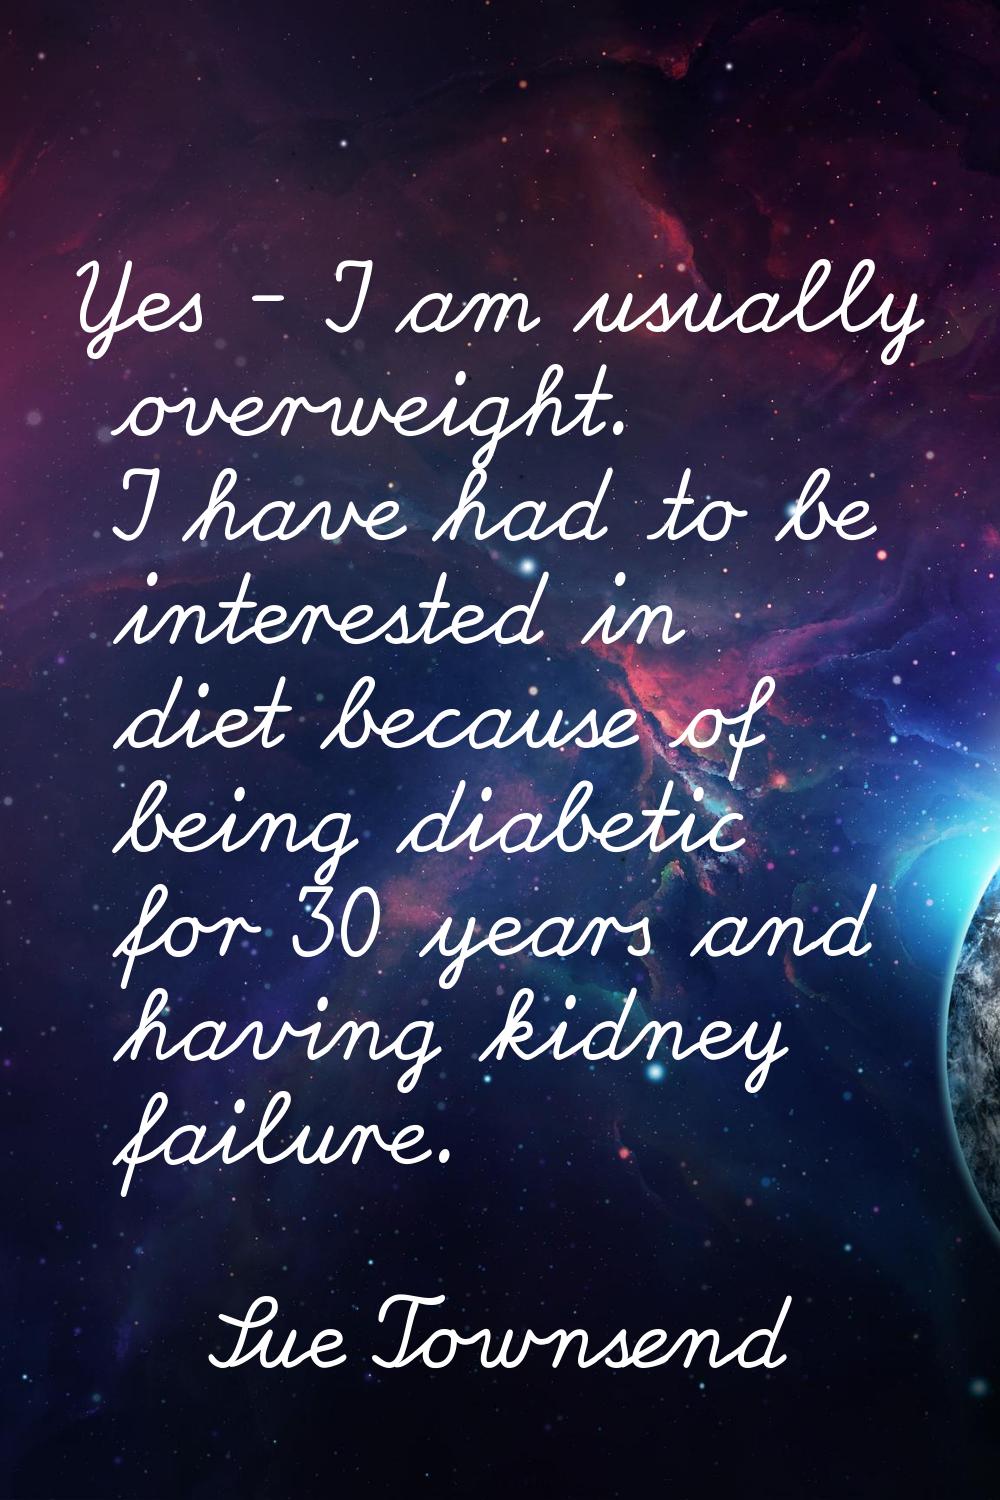 Yes - I am usually overweight. I have had to be interested in diet because of being diabetic for 30